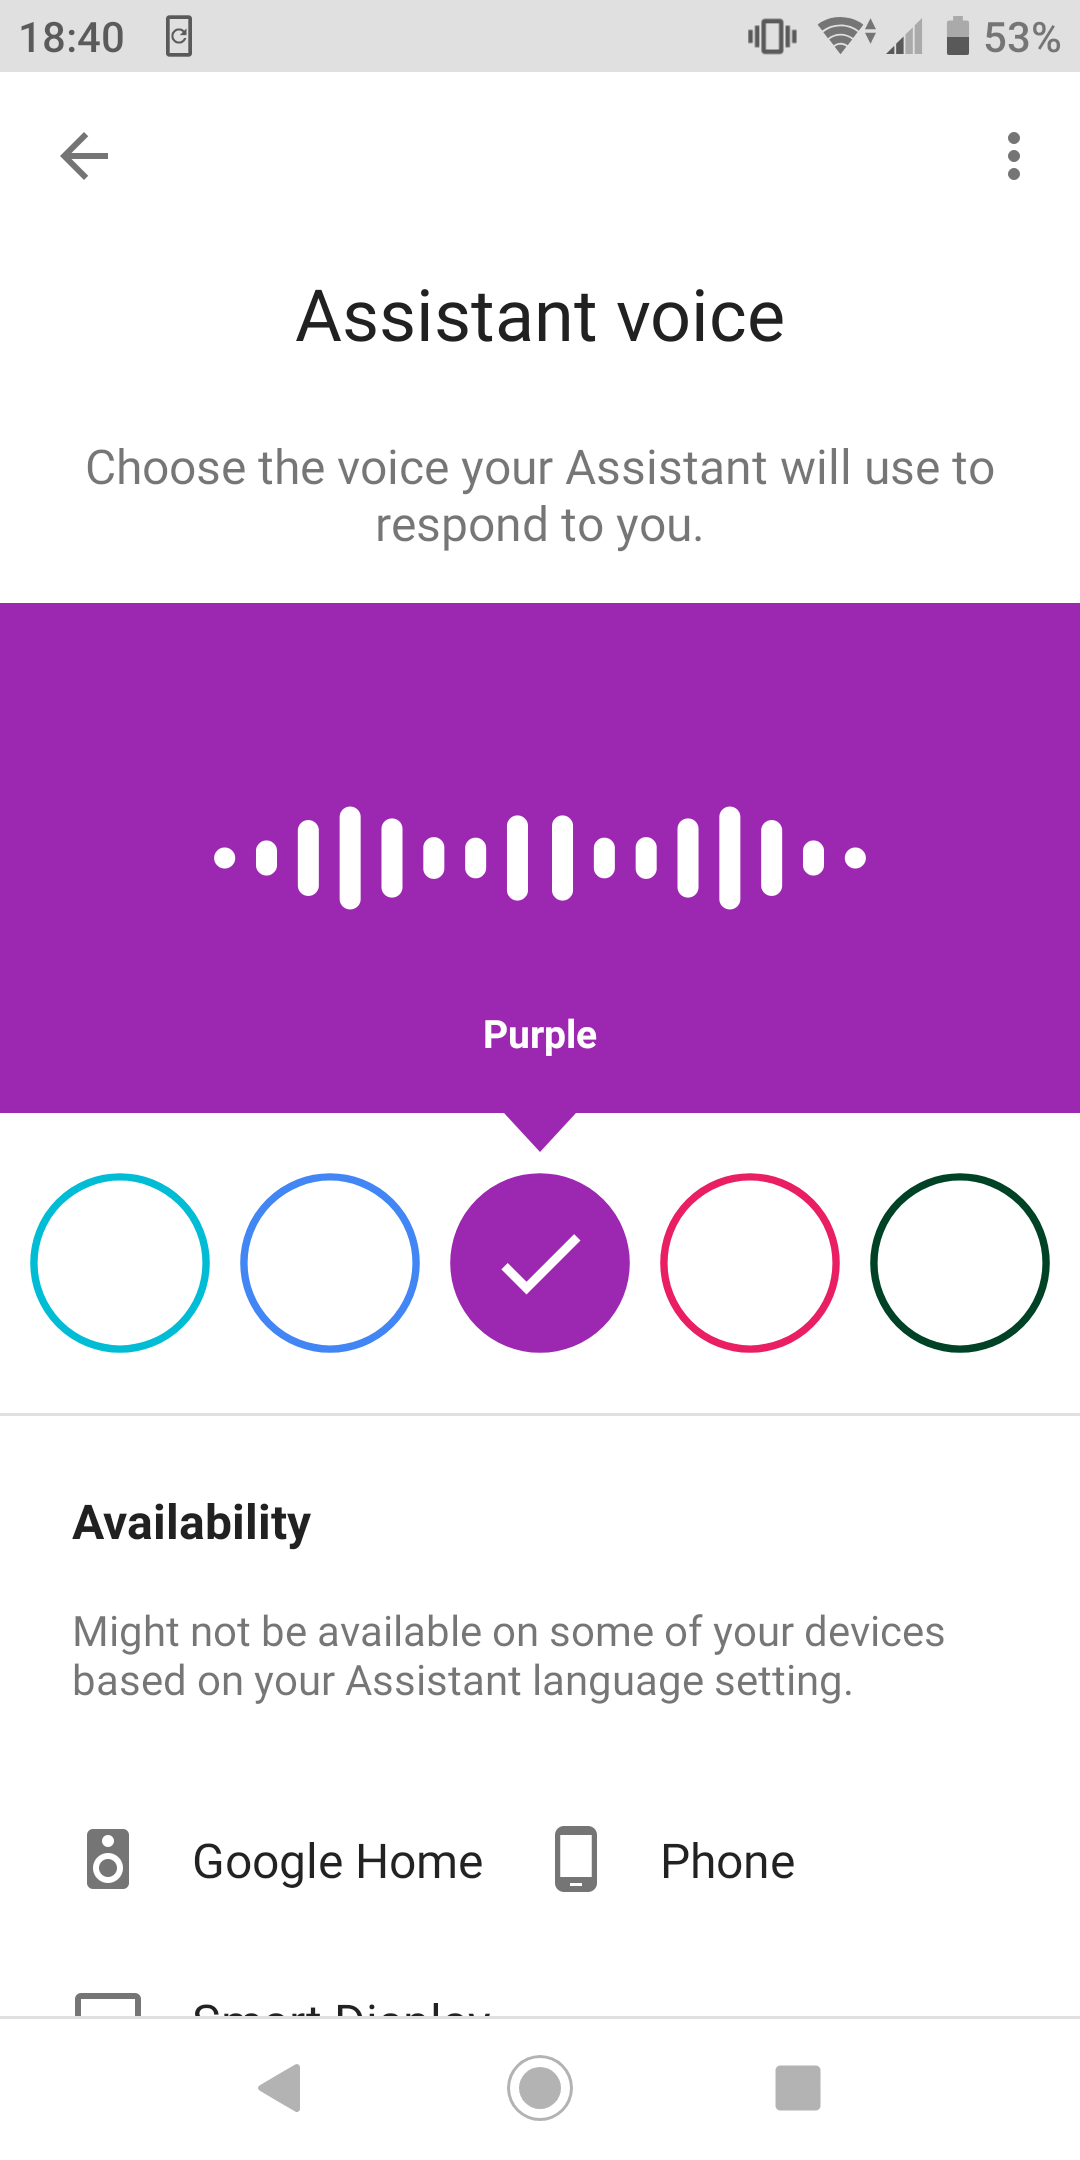 The different voice options for Google Assistant are named after colors instead of using the [nationality]+sex formula used for the naming of Siri’s voices.